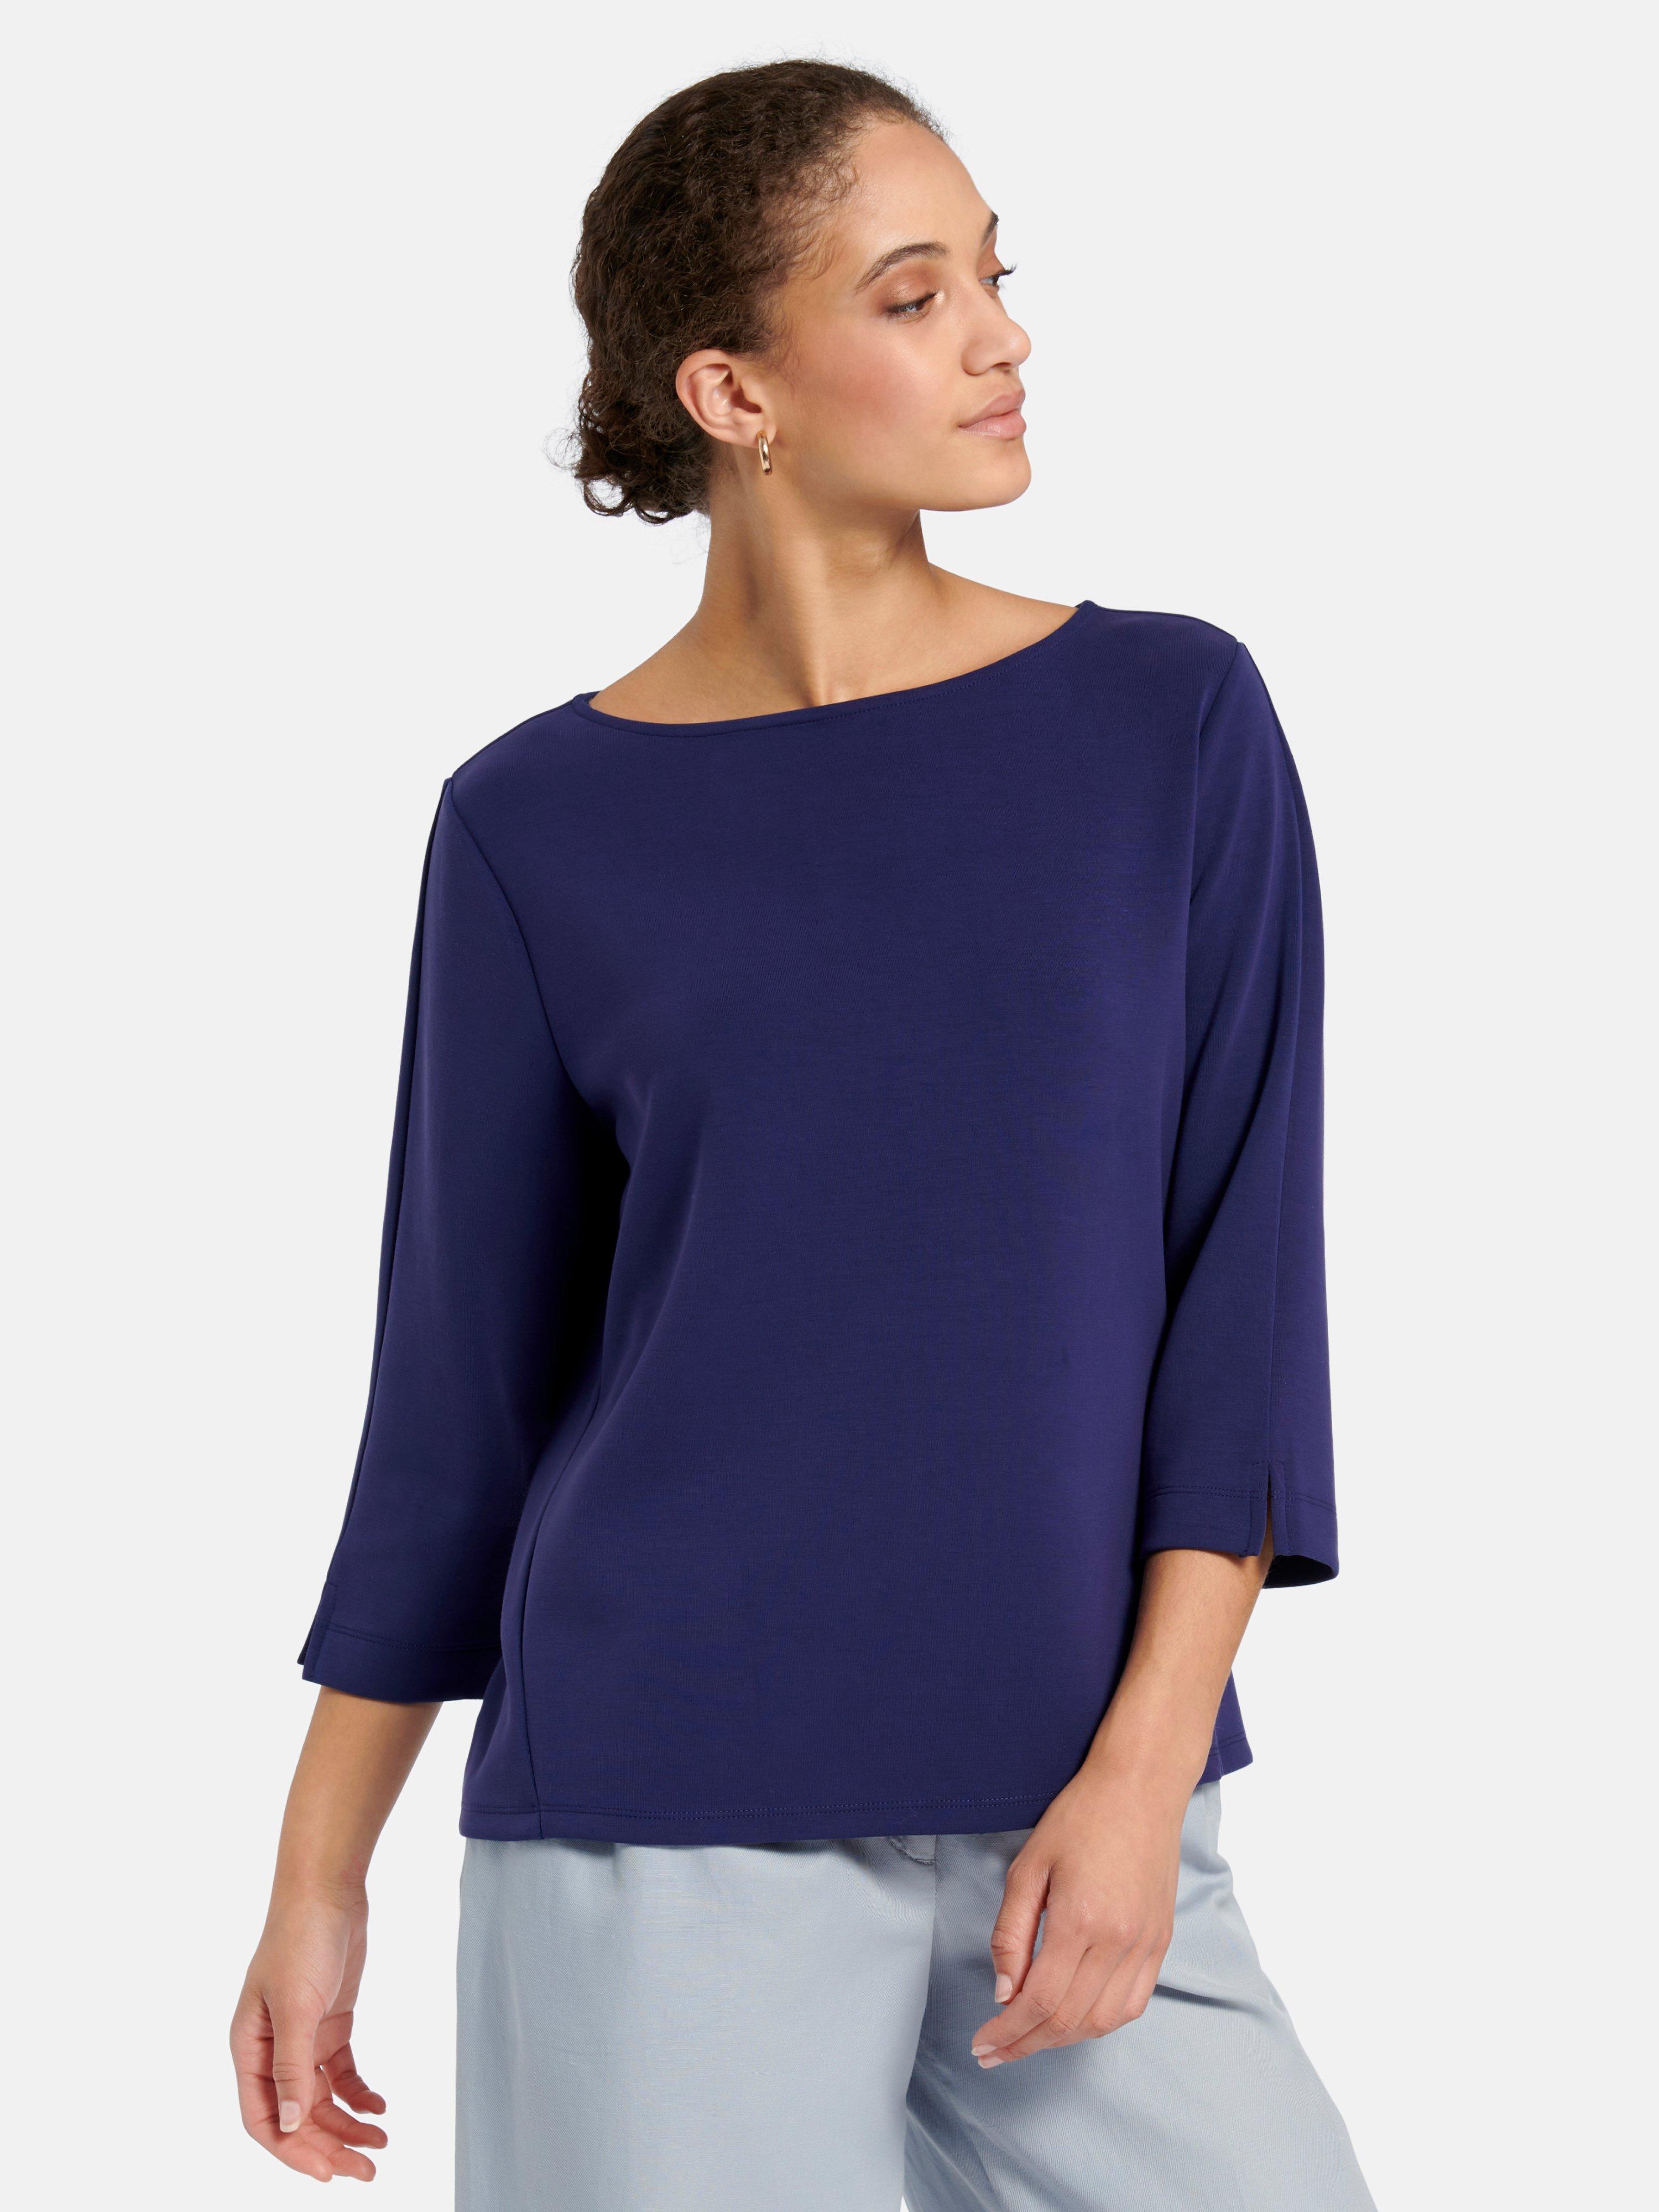 Peter Hahn - Sweatshirt with 3/4-length sleeves and boat neck - navy